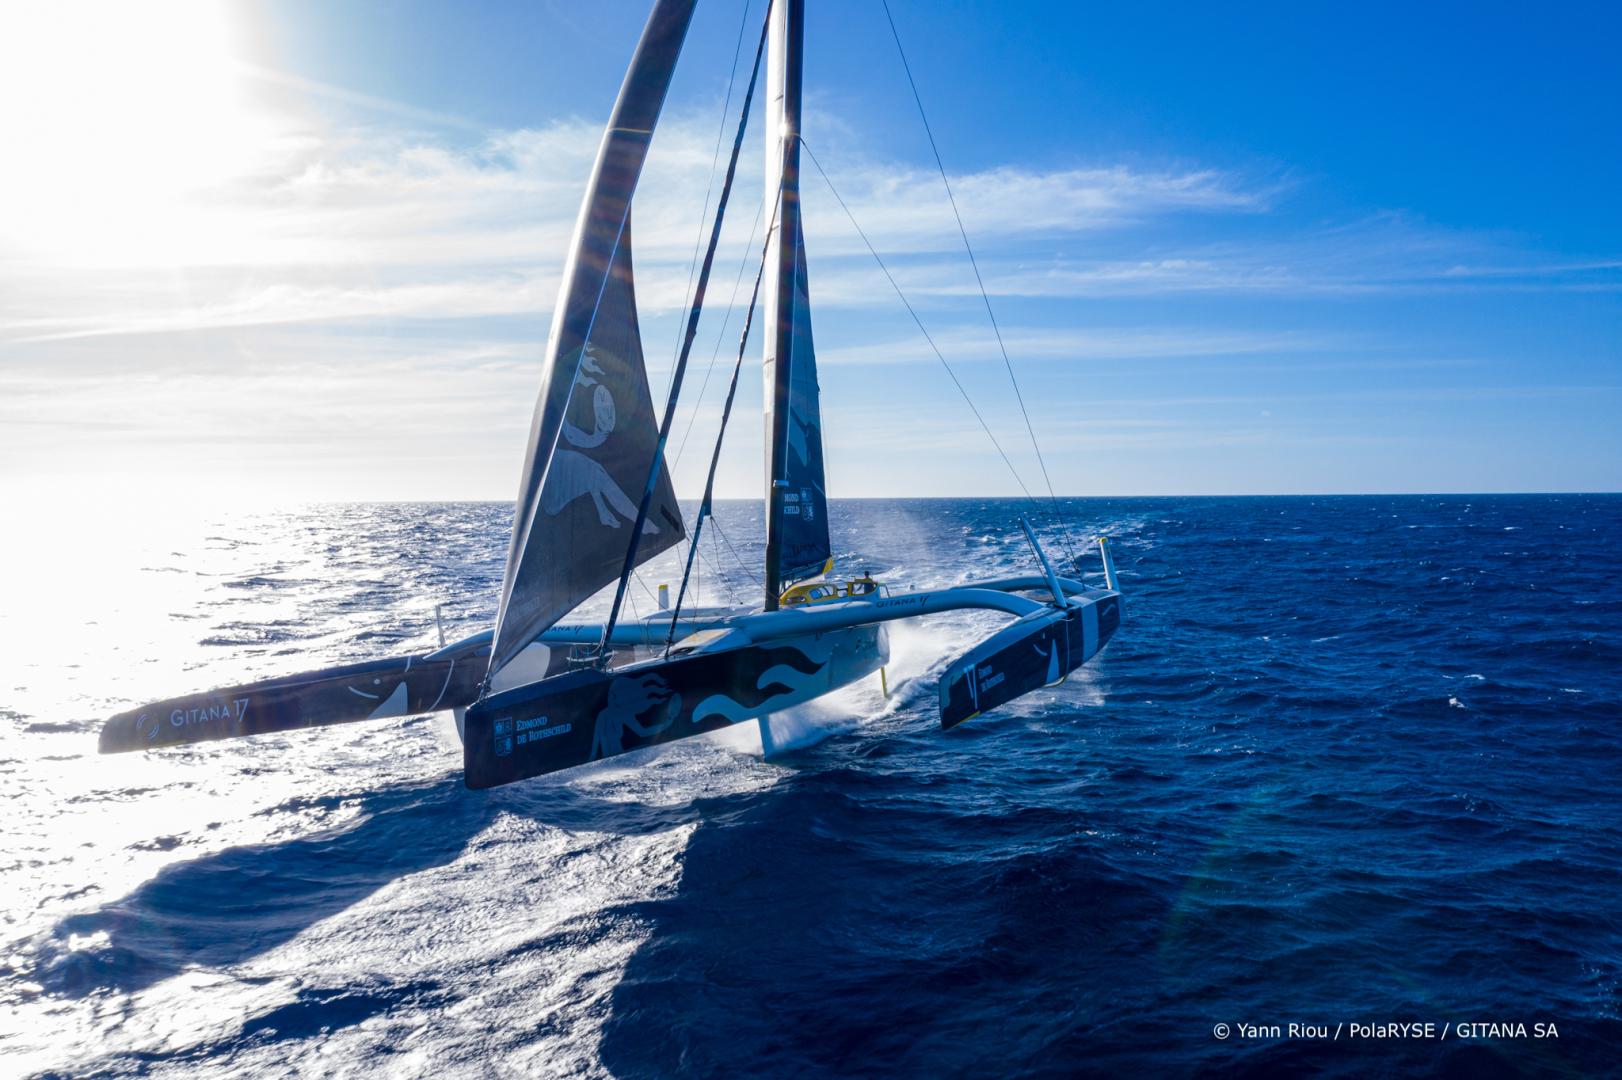 Haul out and spring refit for the Maxi Edmond de Rothschild